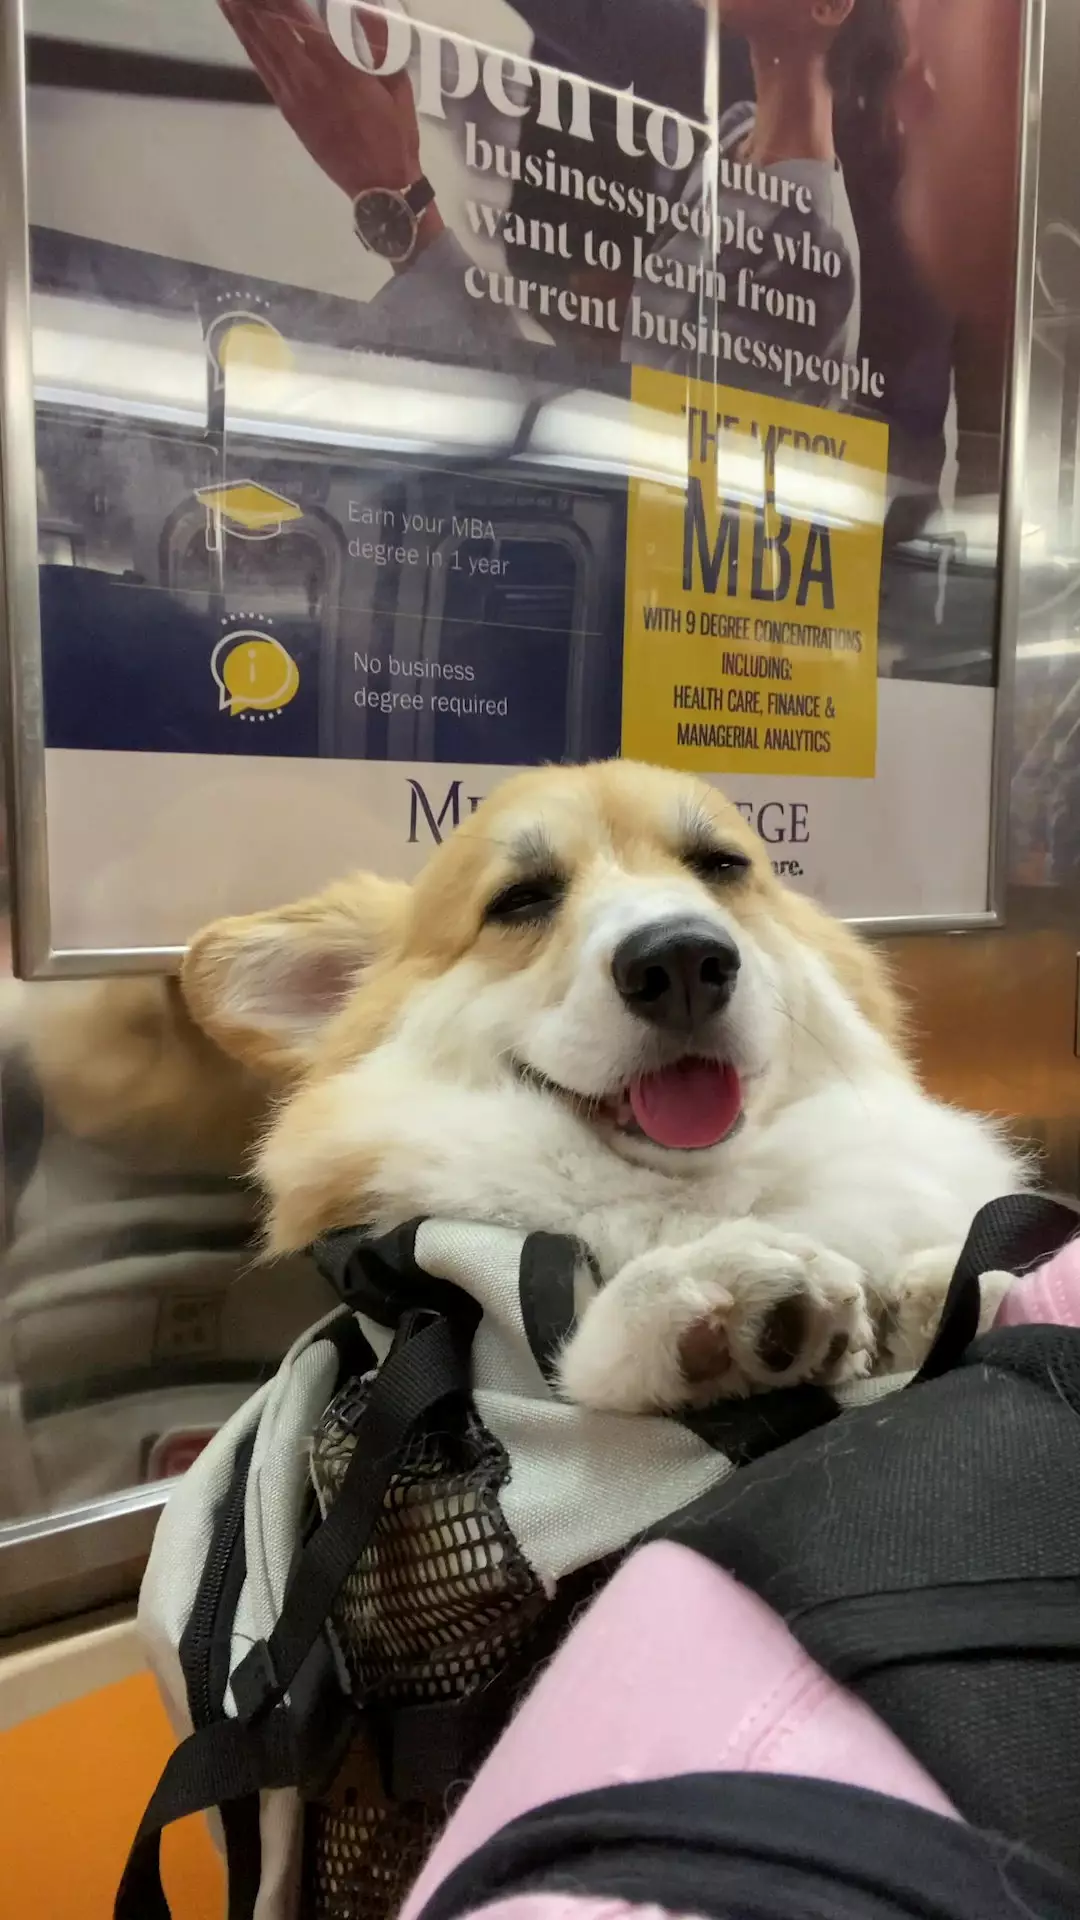 Little Maxine naps, smiles, and interacts with passengers (